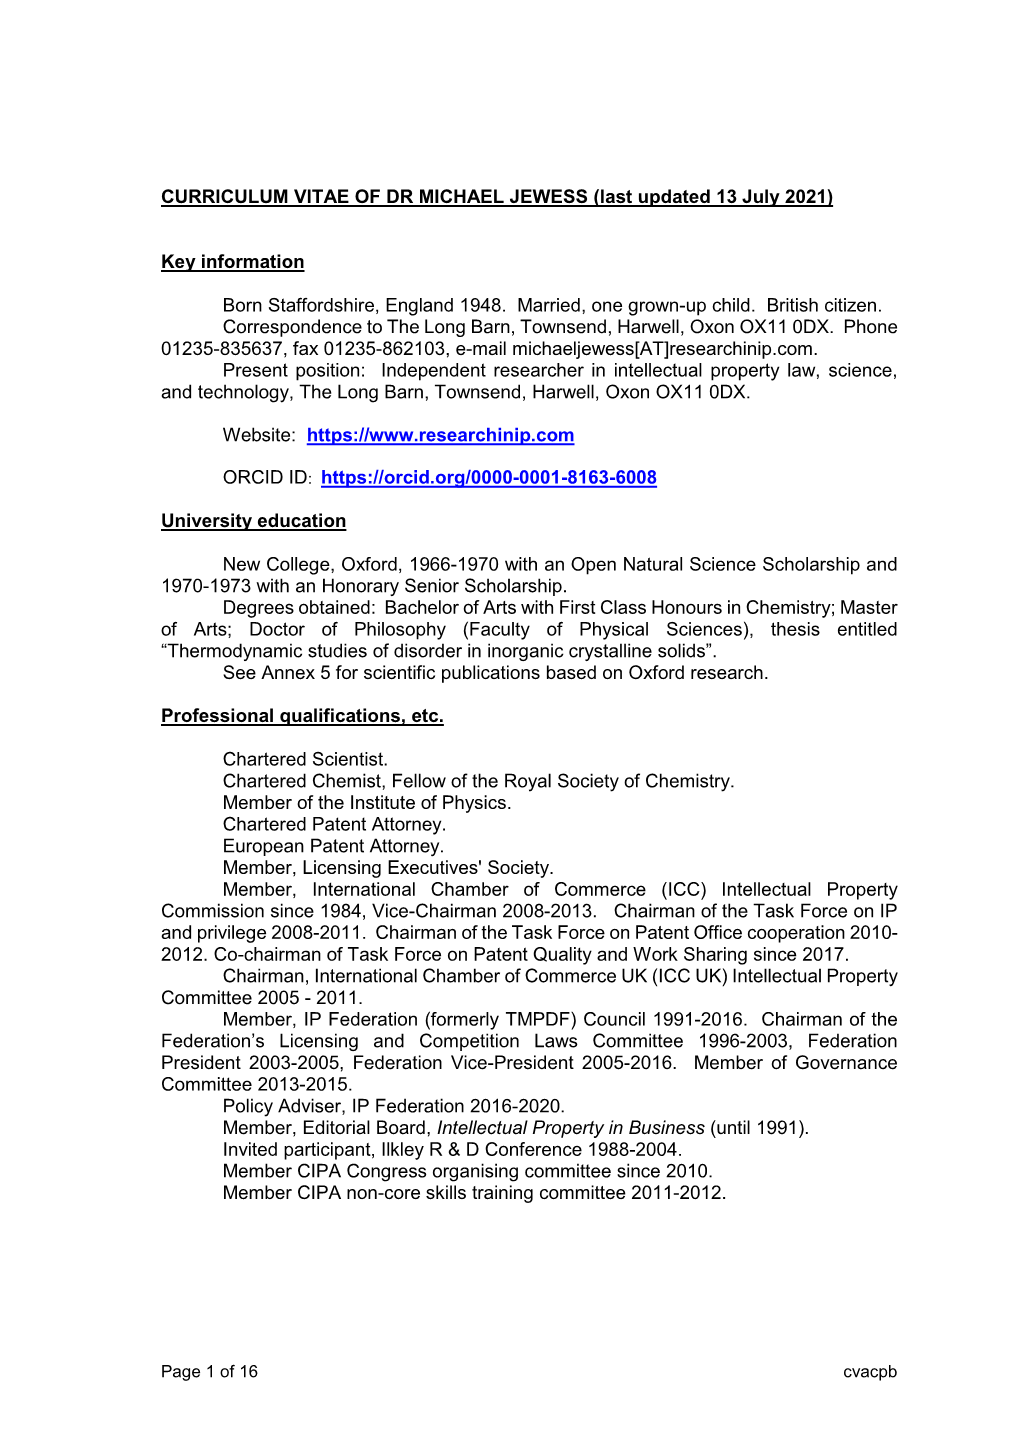 CURRICULUM VITAE of DR MICHAEL JEWESS (Last Updated 13 July 2021)